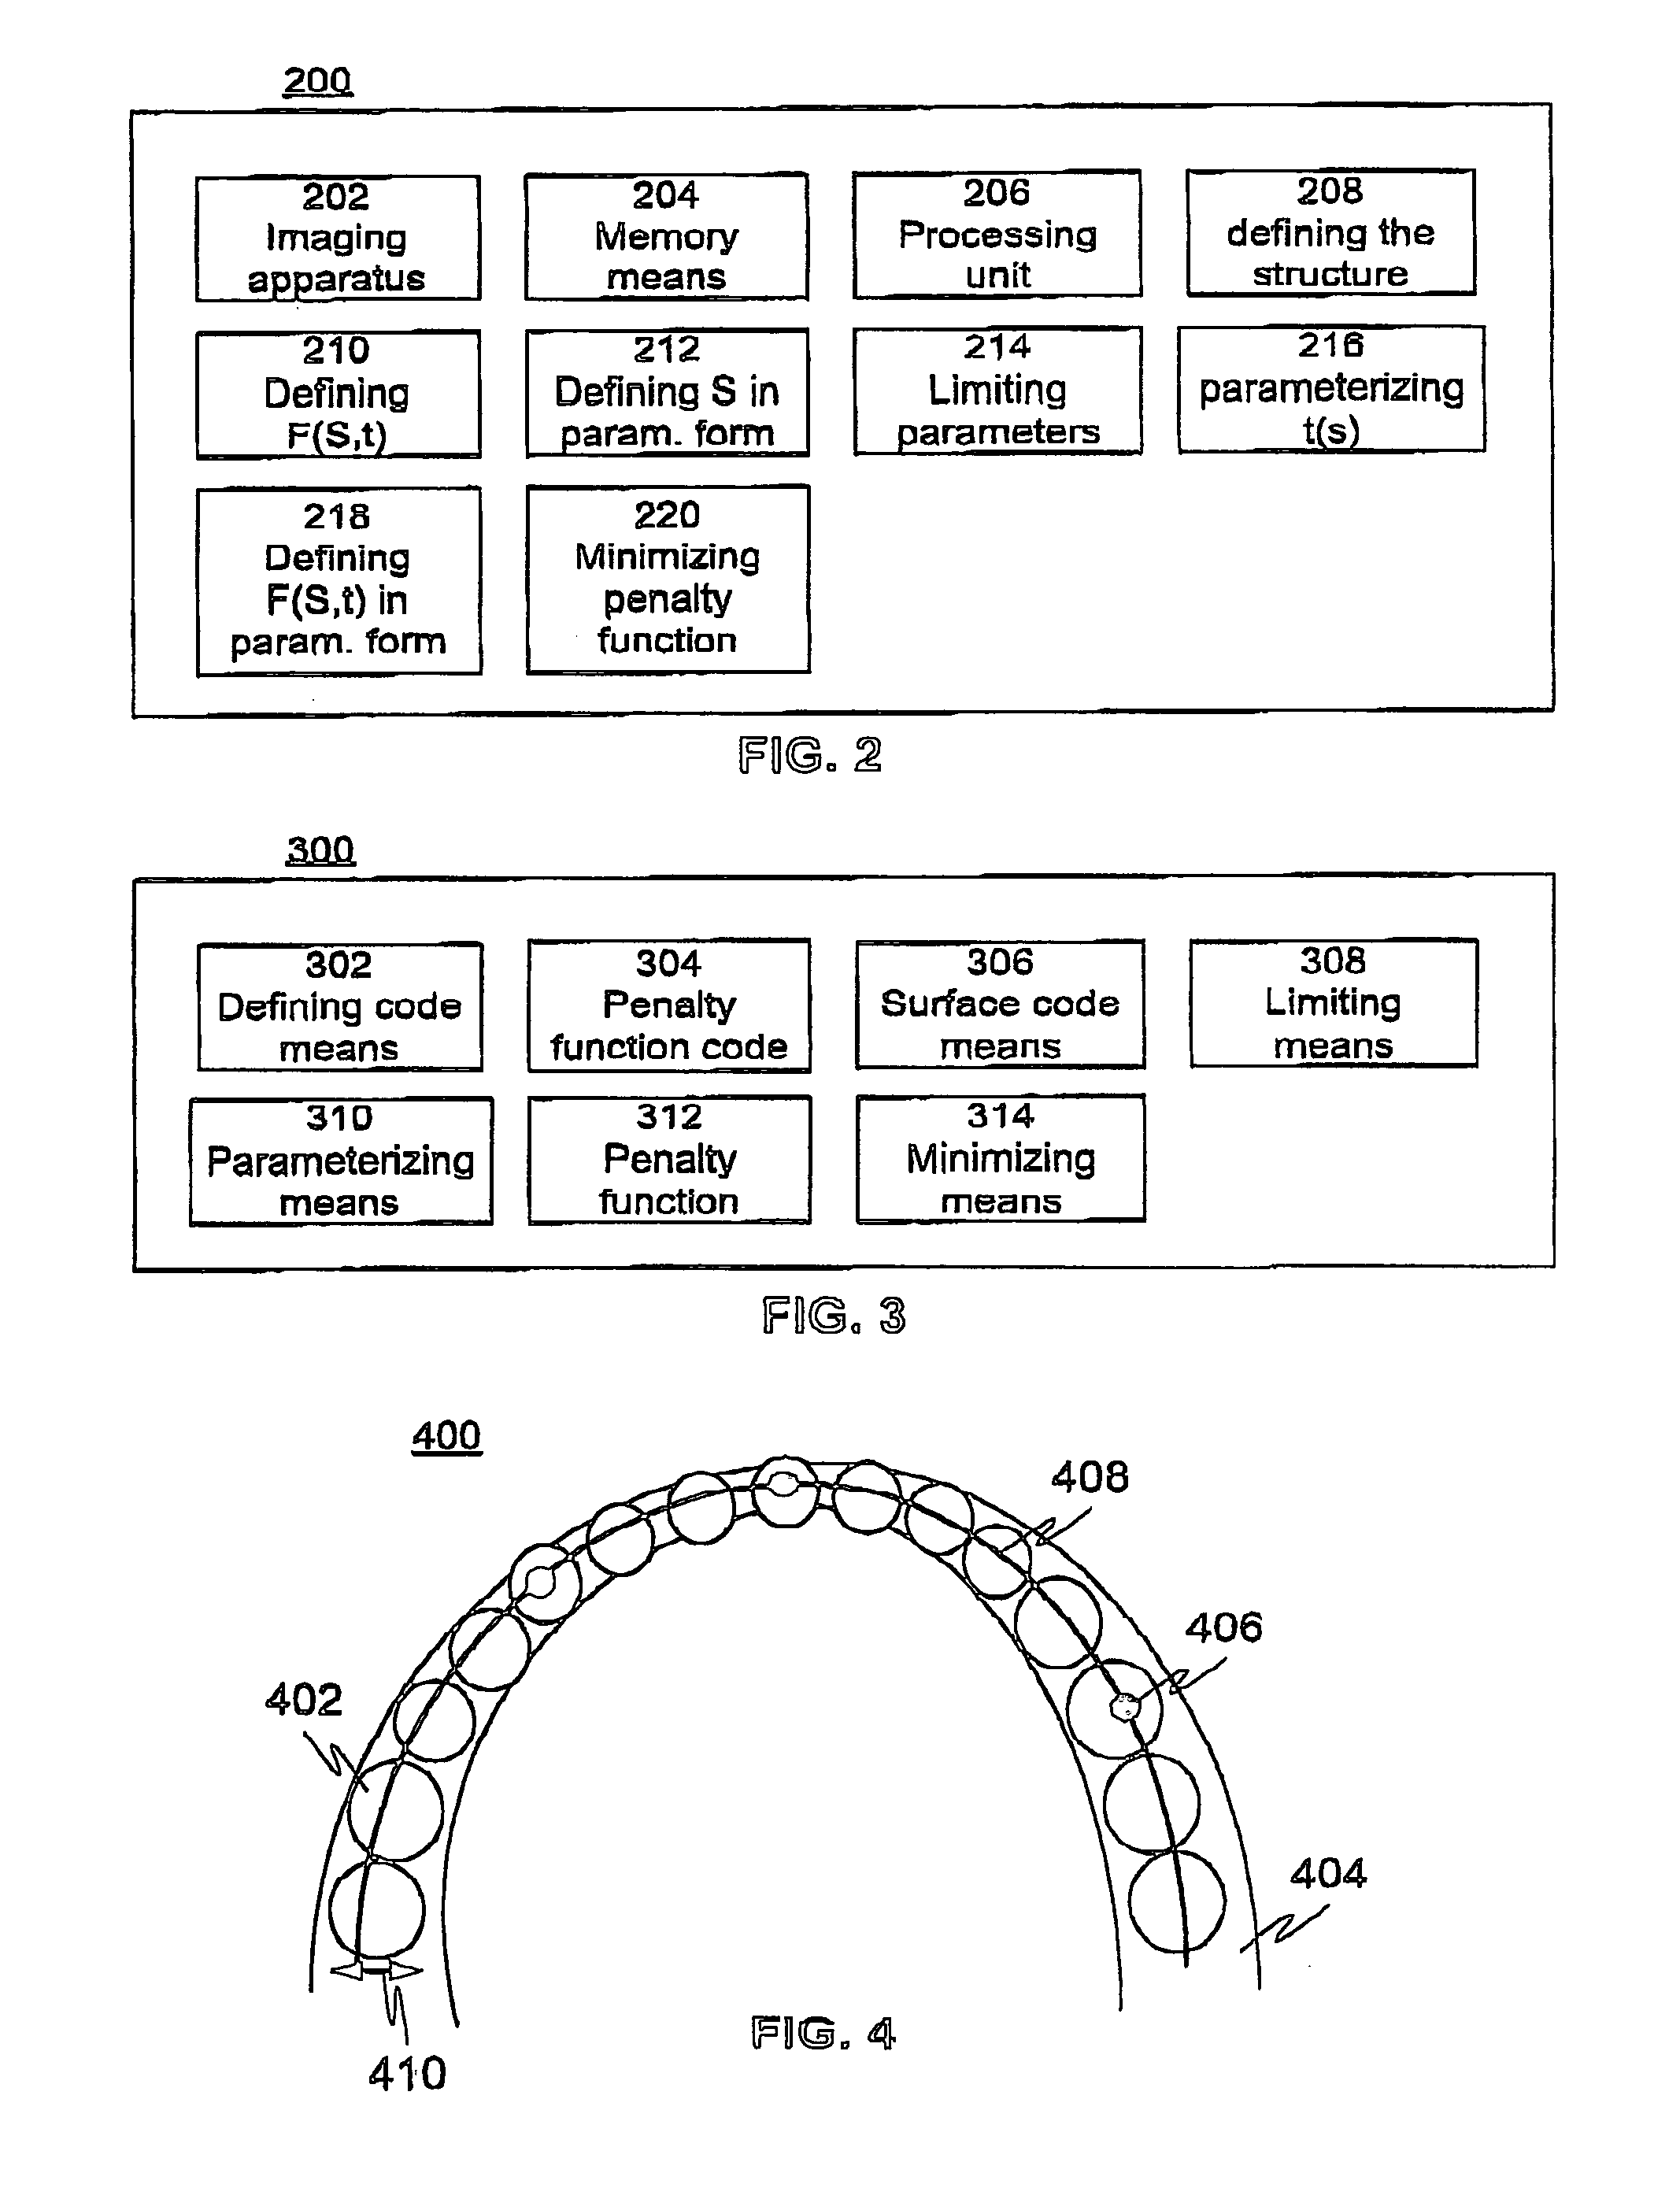 Method and system for determining a sharp panoramic image constructed from a group of projection images